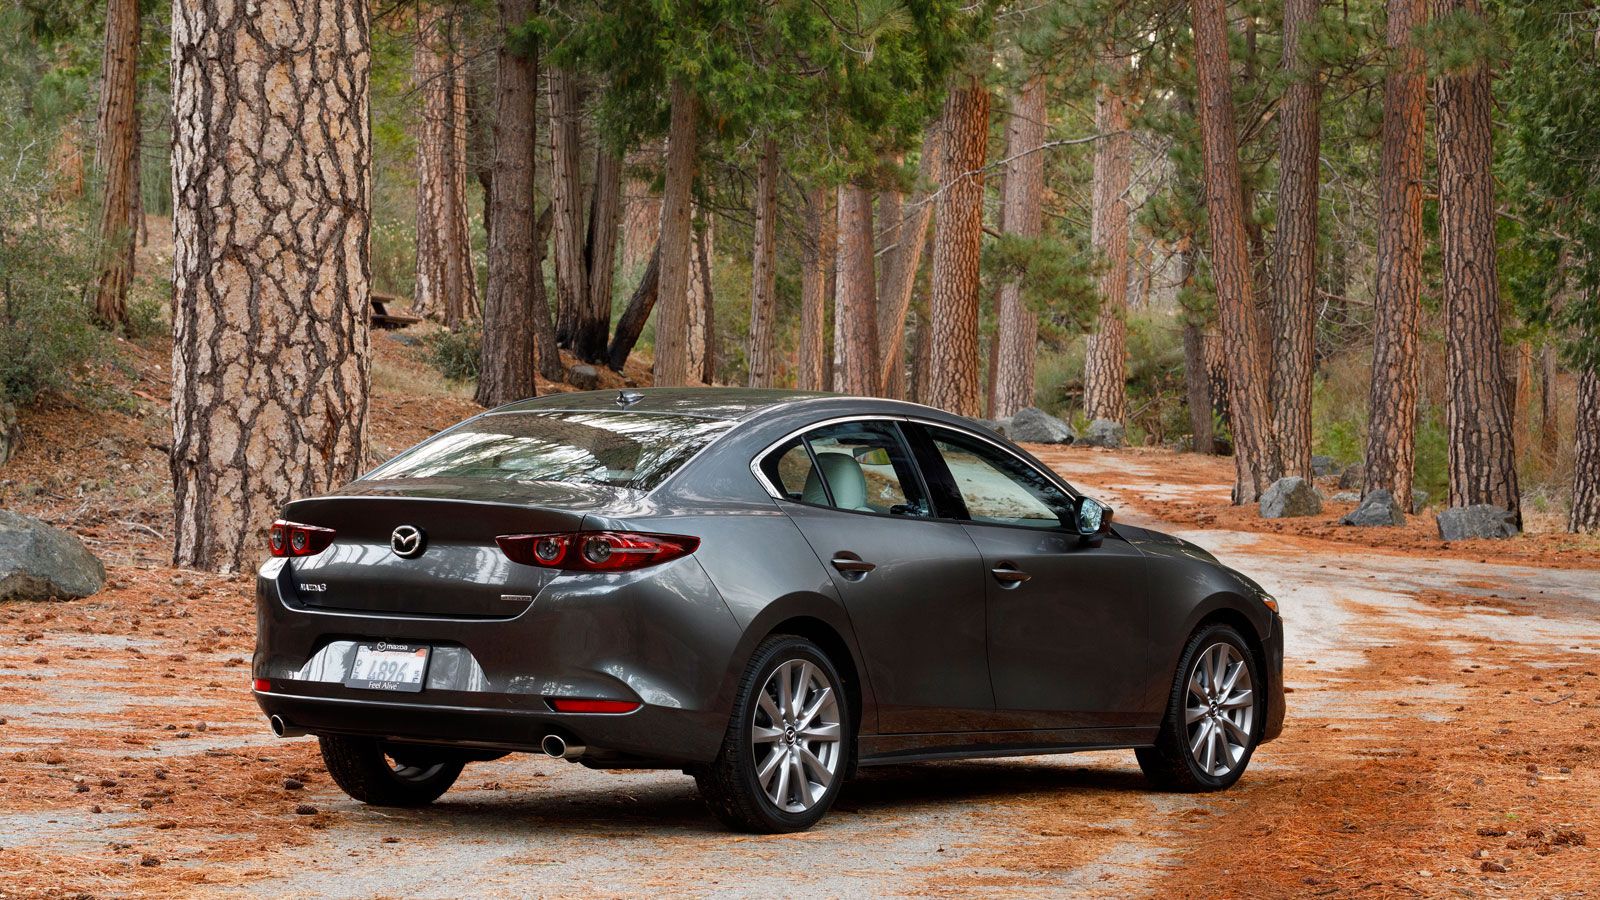 2019 Mazda 3 first drive: Not all new, but damn good anyway